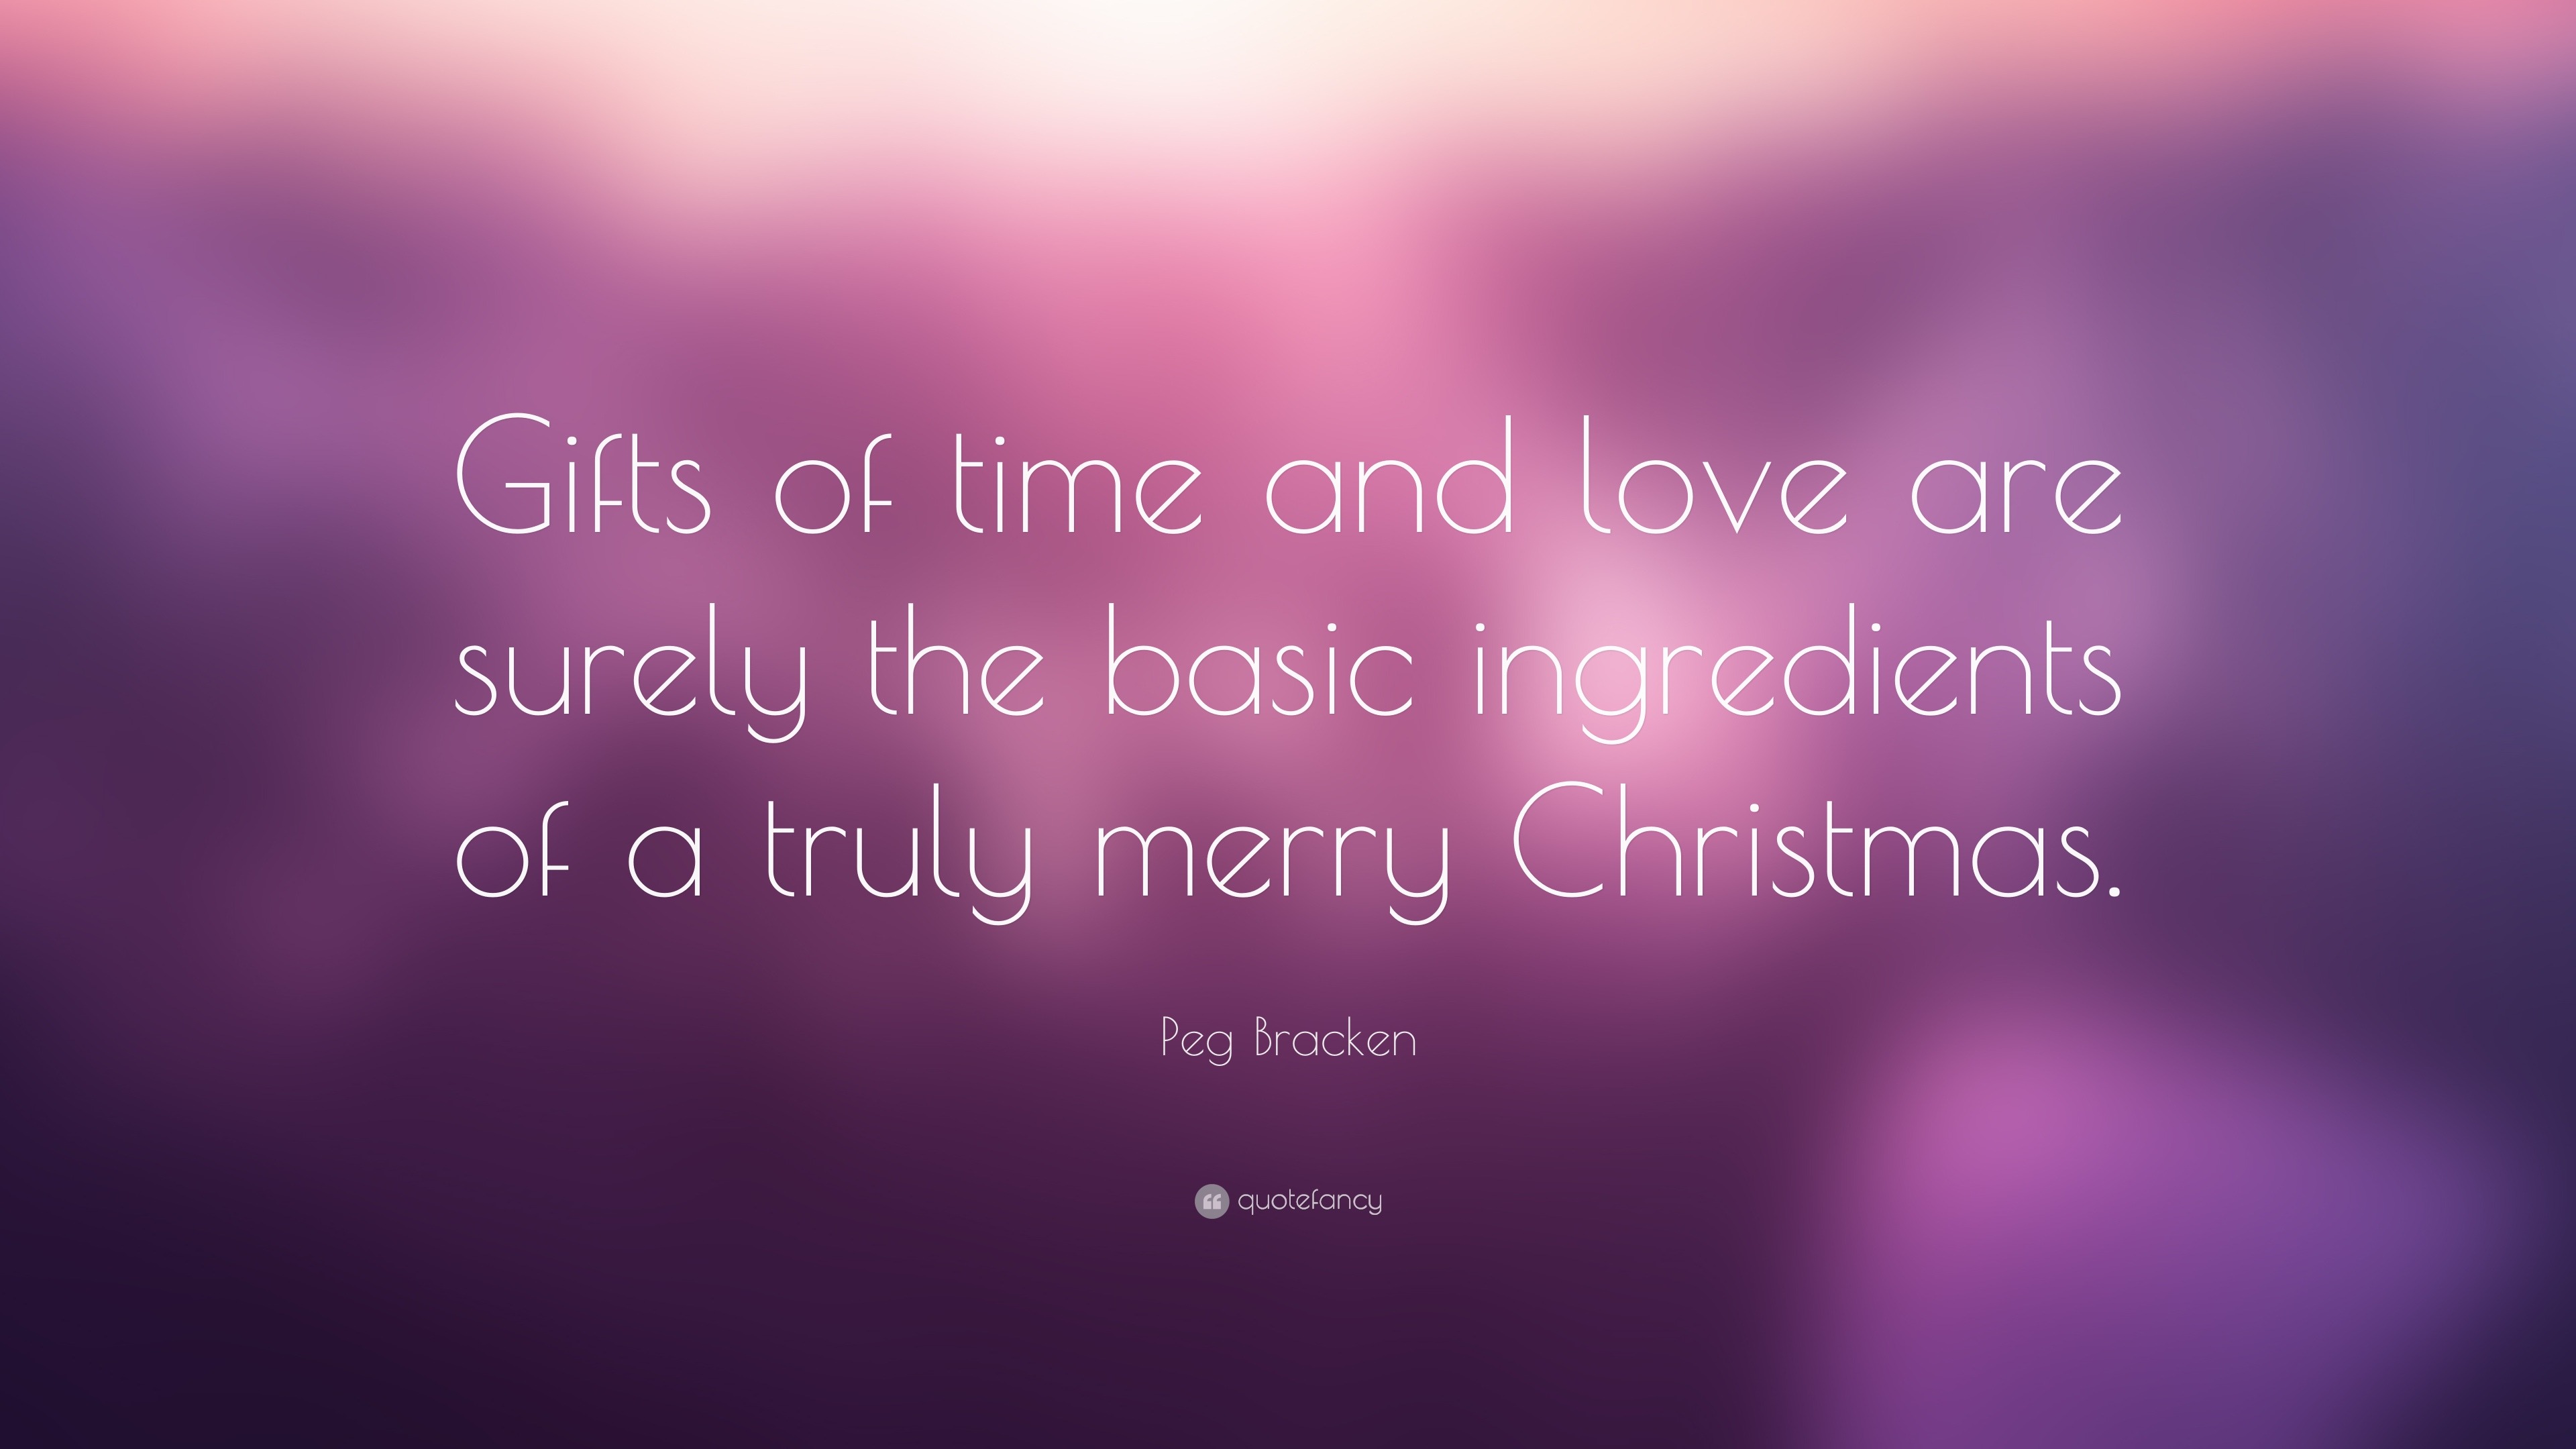 Peg Bracken Quote “Gifts of time and love are surely the basic ingre nts of